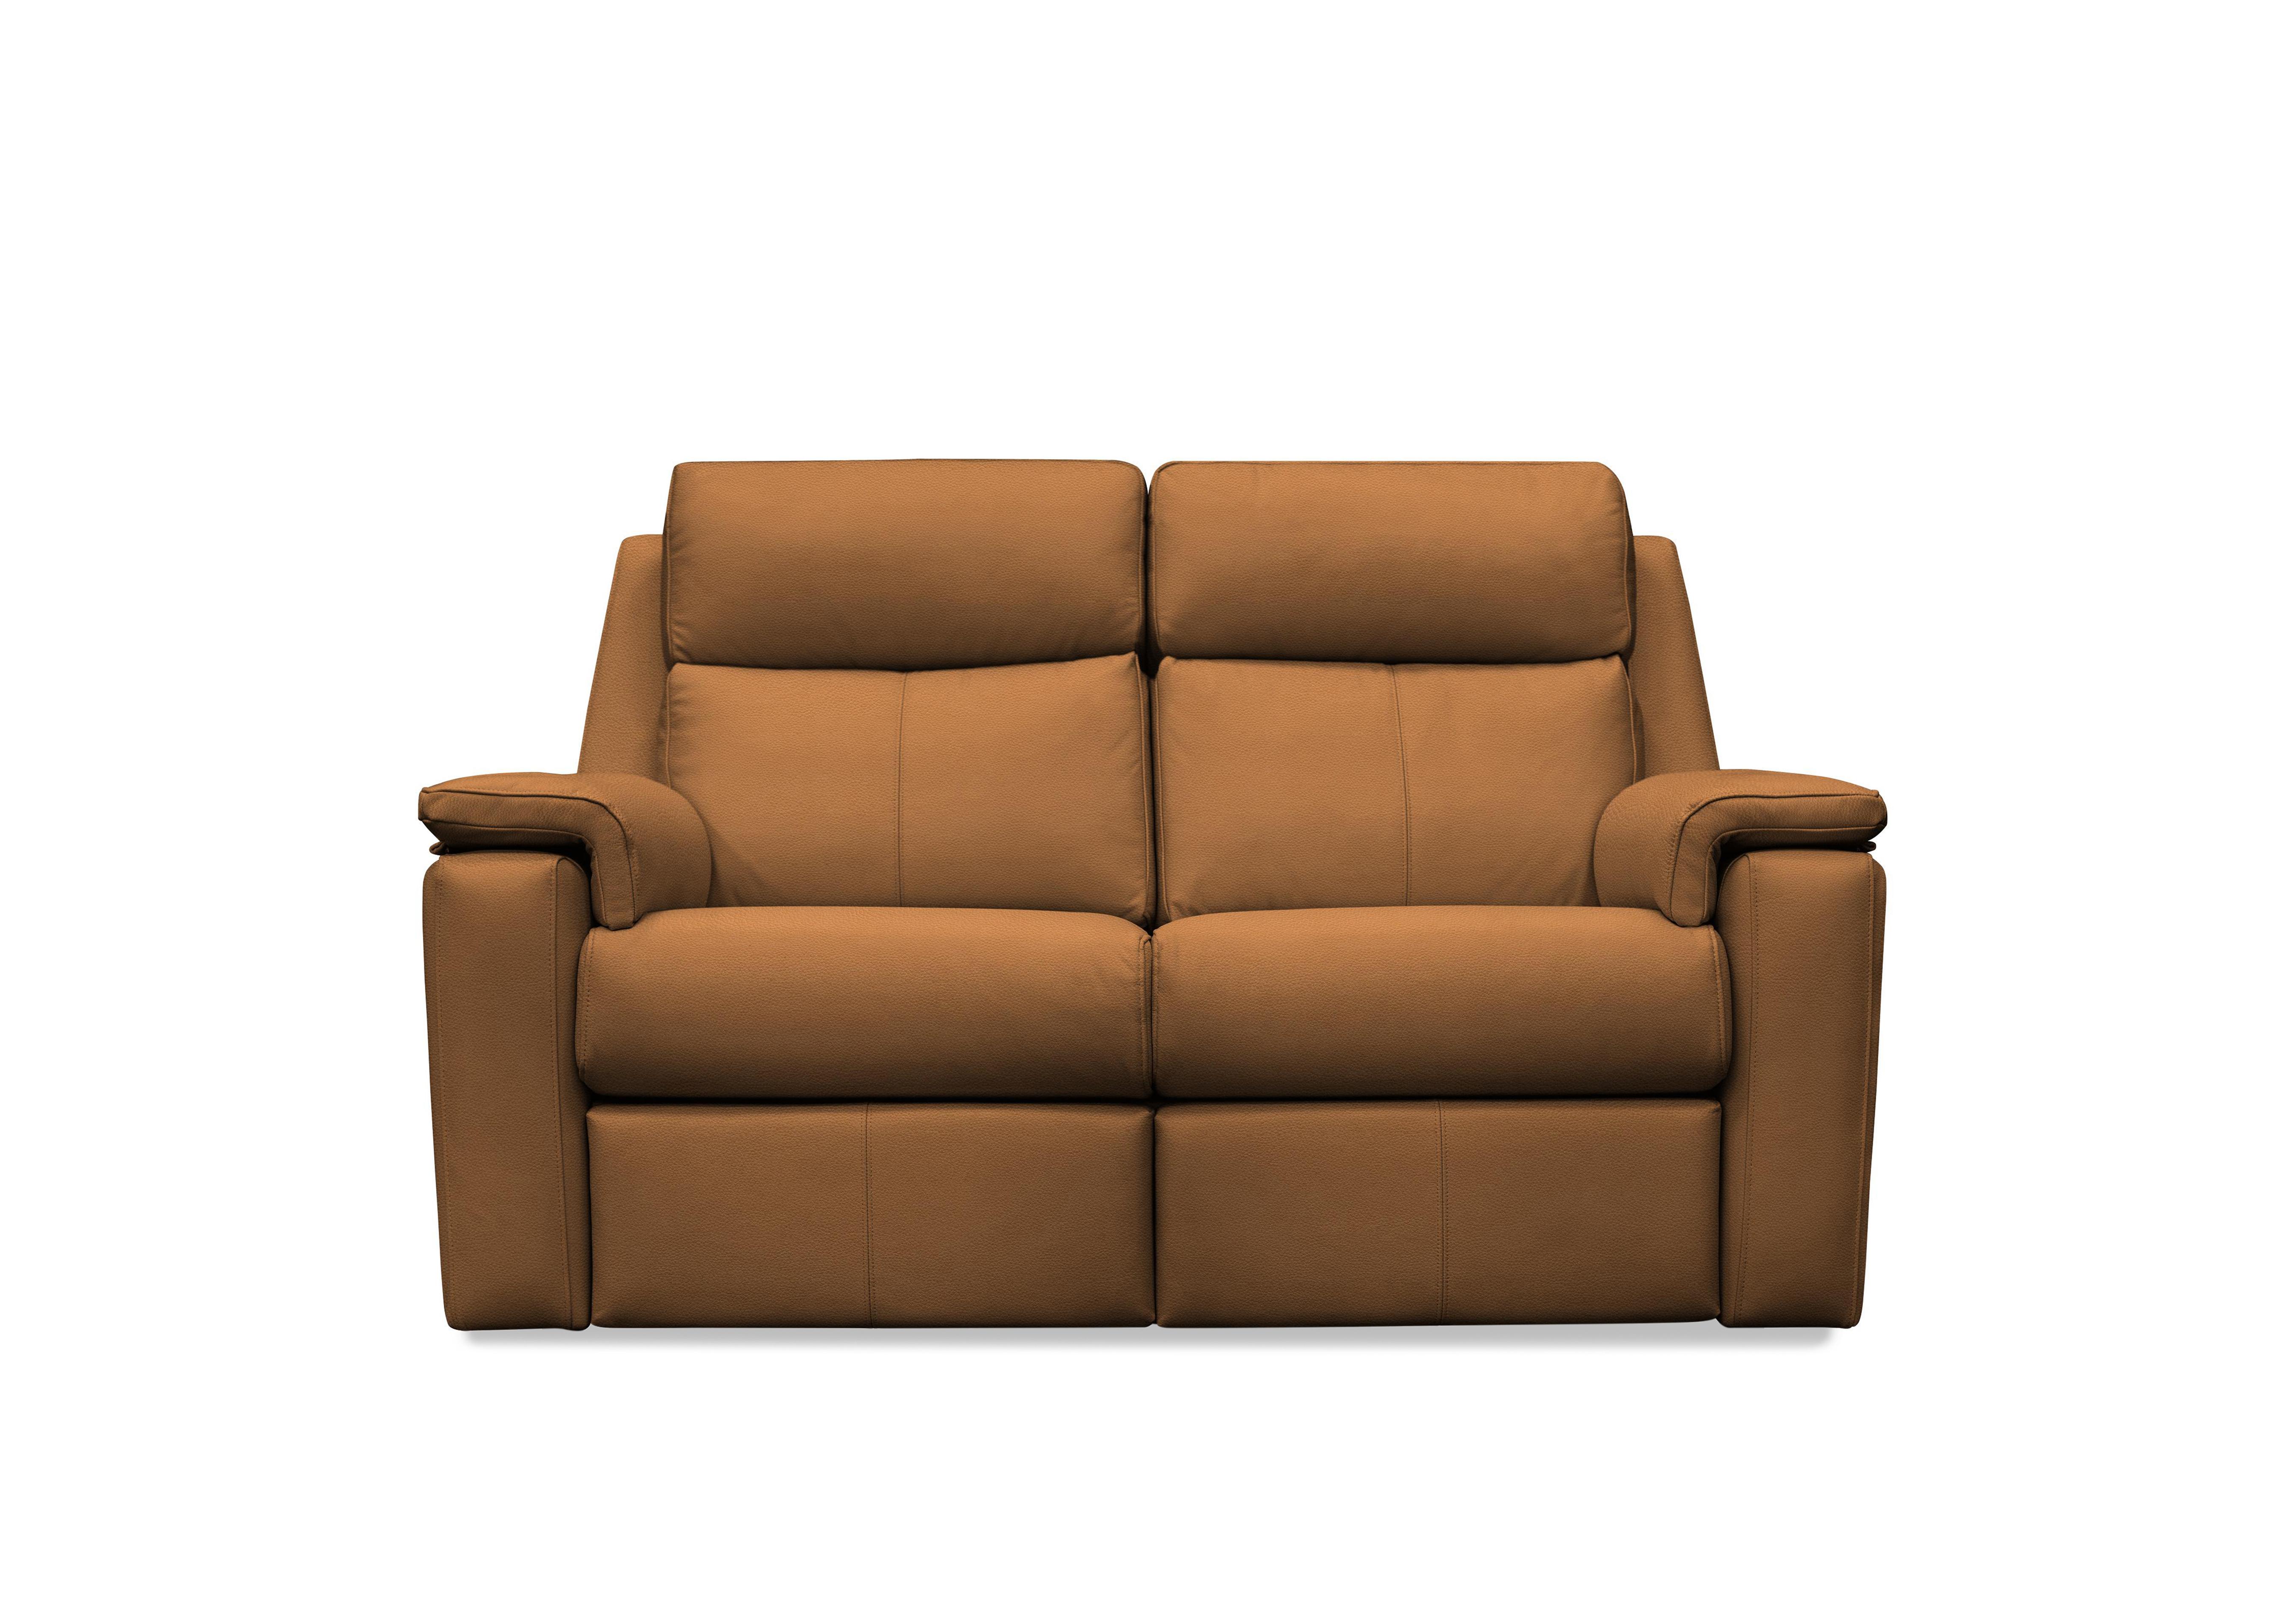 Thornbury 2 Seater Leather Power Recliner Sofa with Power Headrests and Power Lumbar in L847 Cambridge Tan on Furniture Village